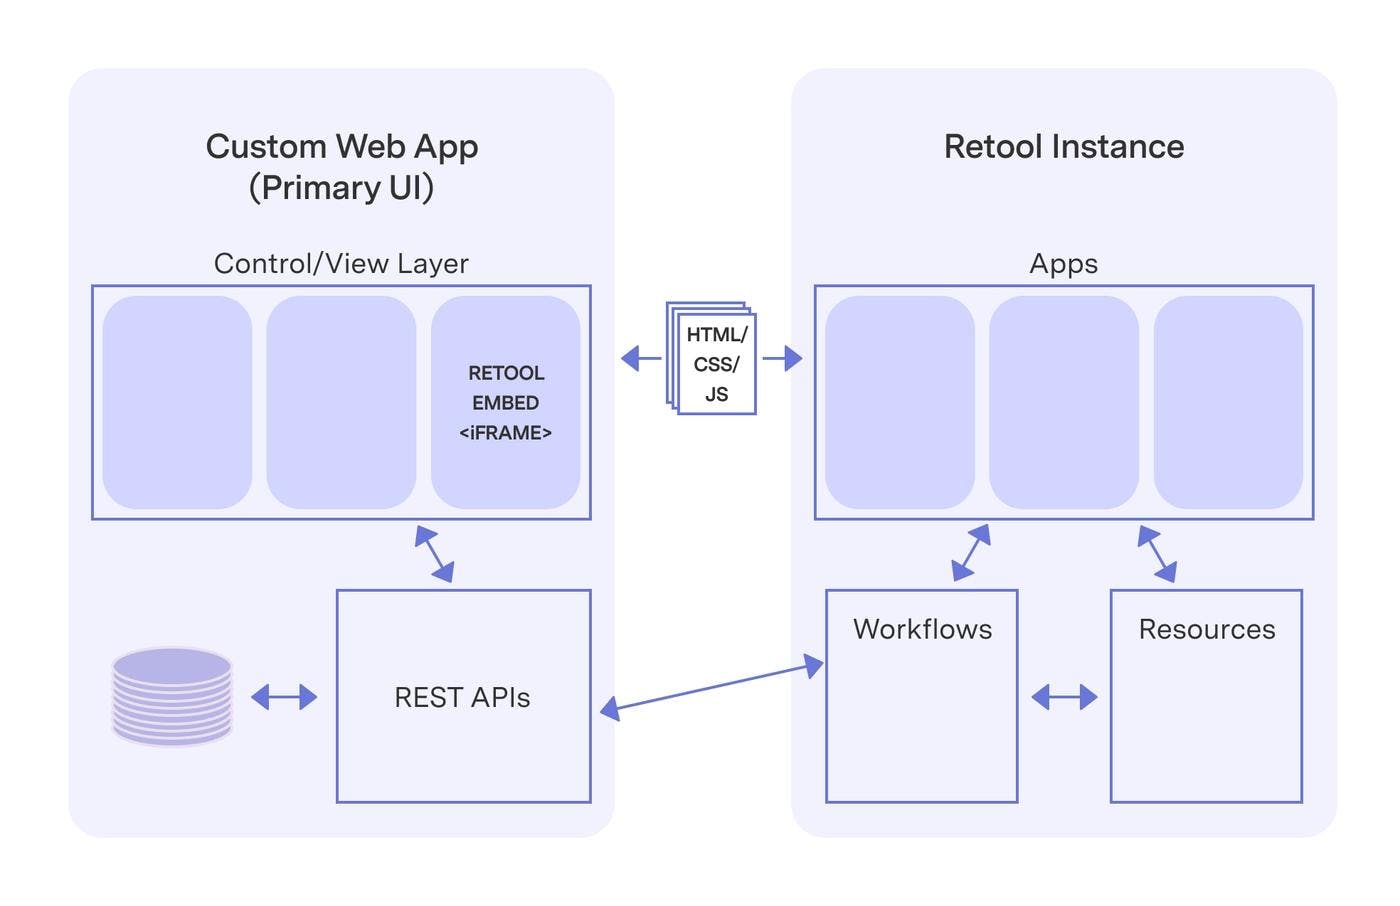 A hybrid architecture with a custom web app "on top" of Retool UI components and services